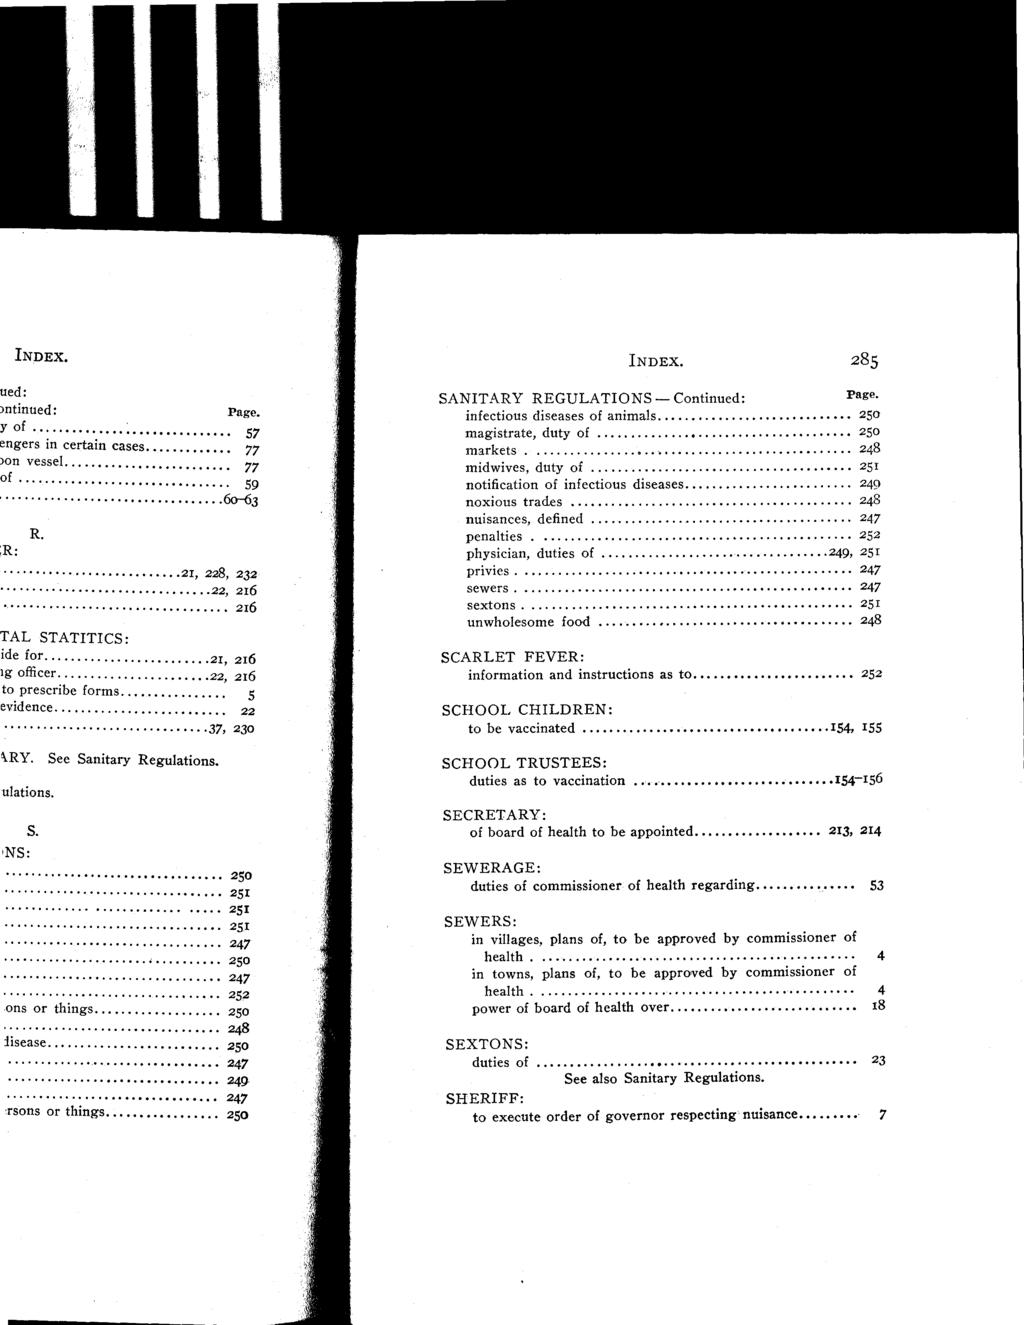 INDEX. 285 SANITARY REGULATIONS -Continued : Page.